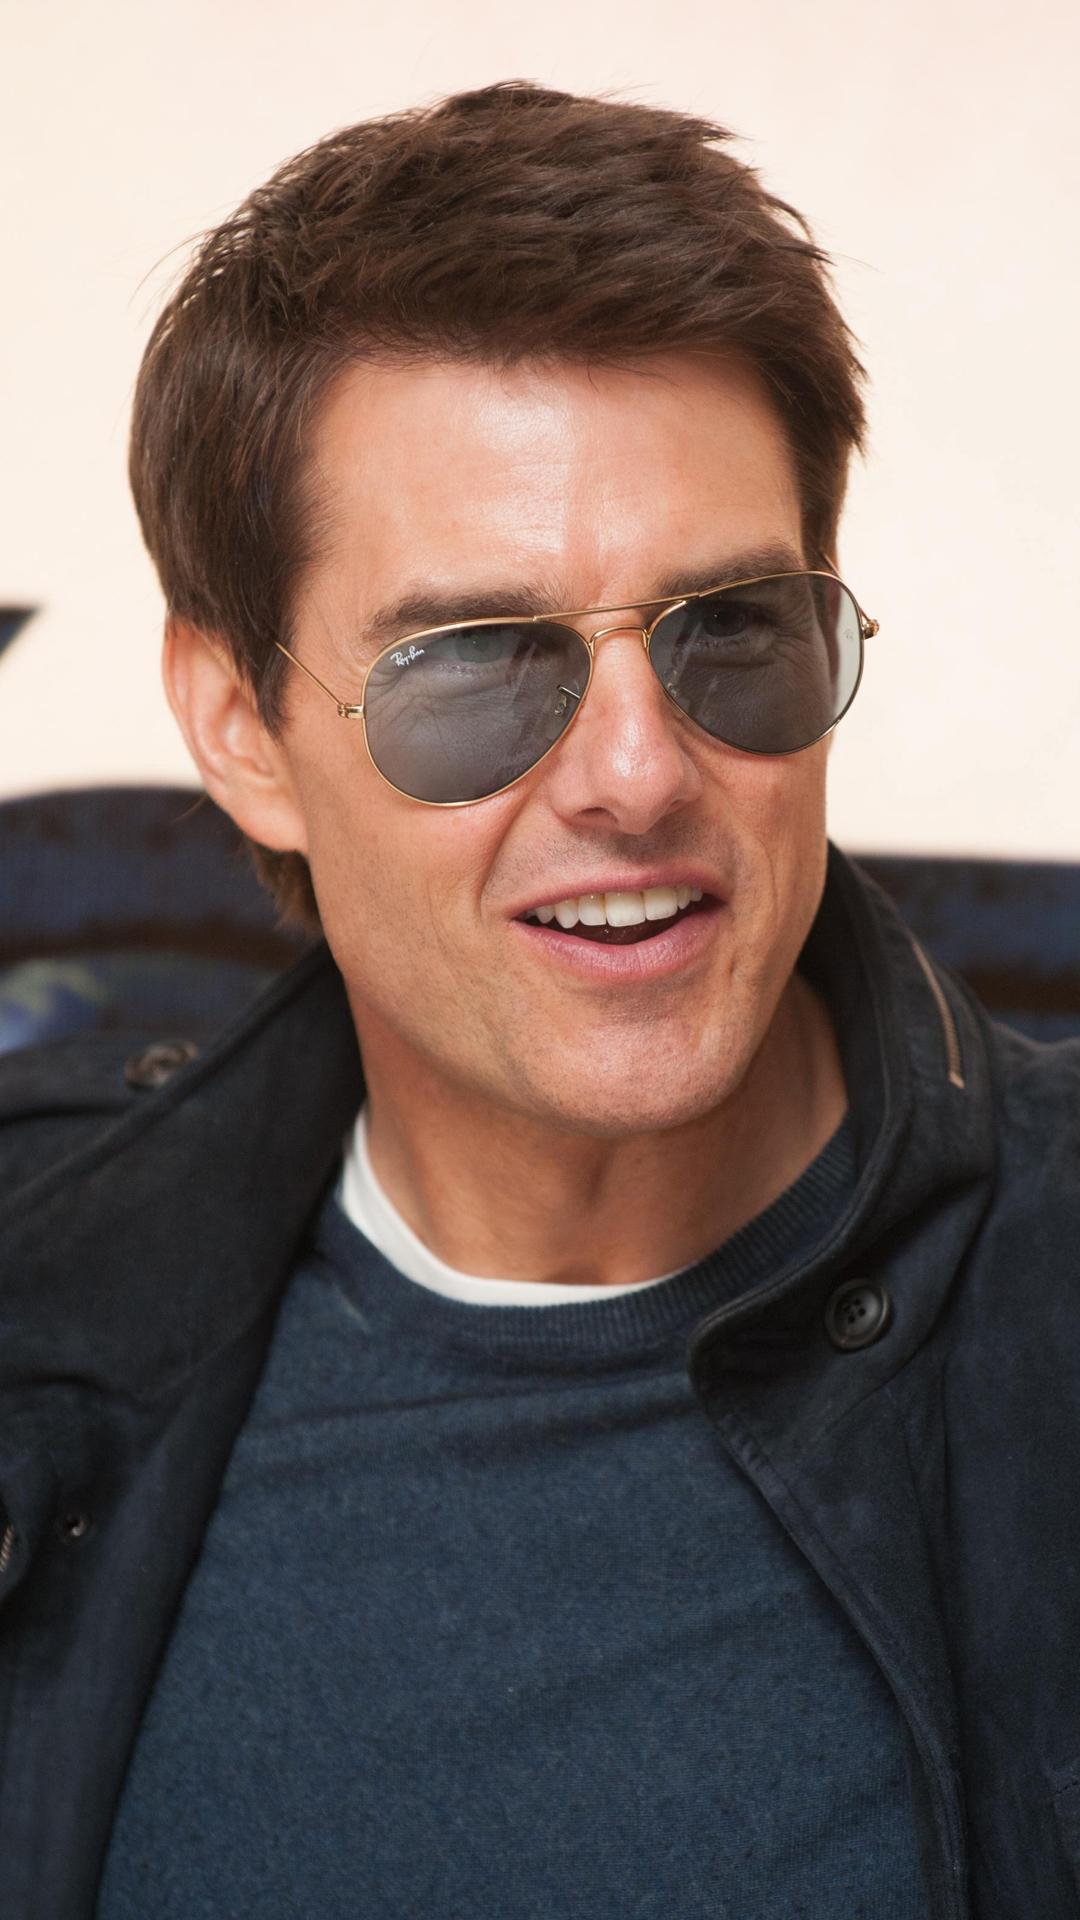 Tom Cruise htc one wallpaper, free and easy to download